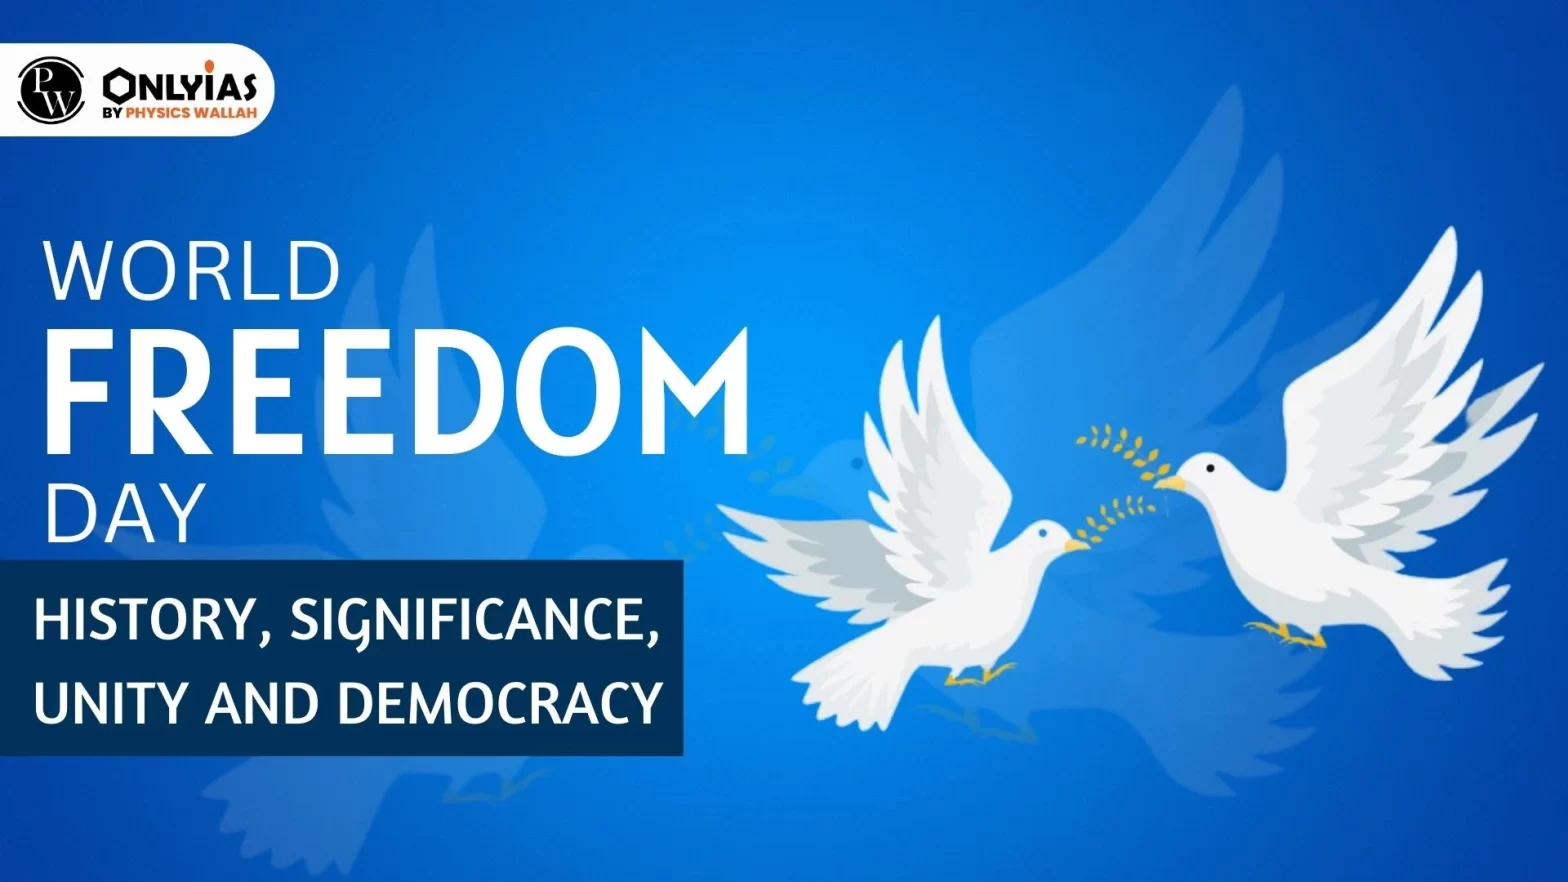 World Freedom Day History, Significance, Unity And Democracy PWOnlyIAS